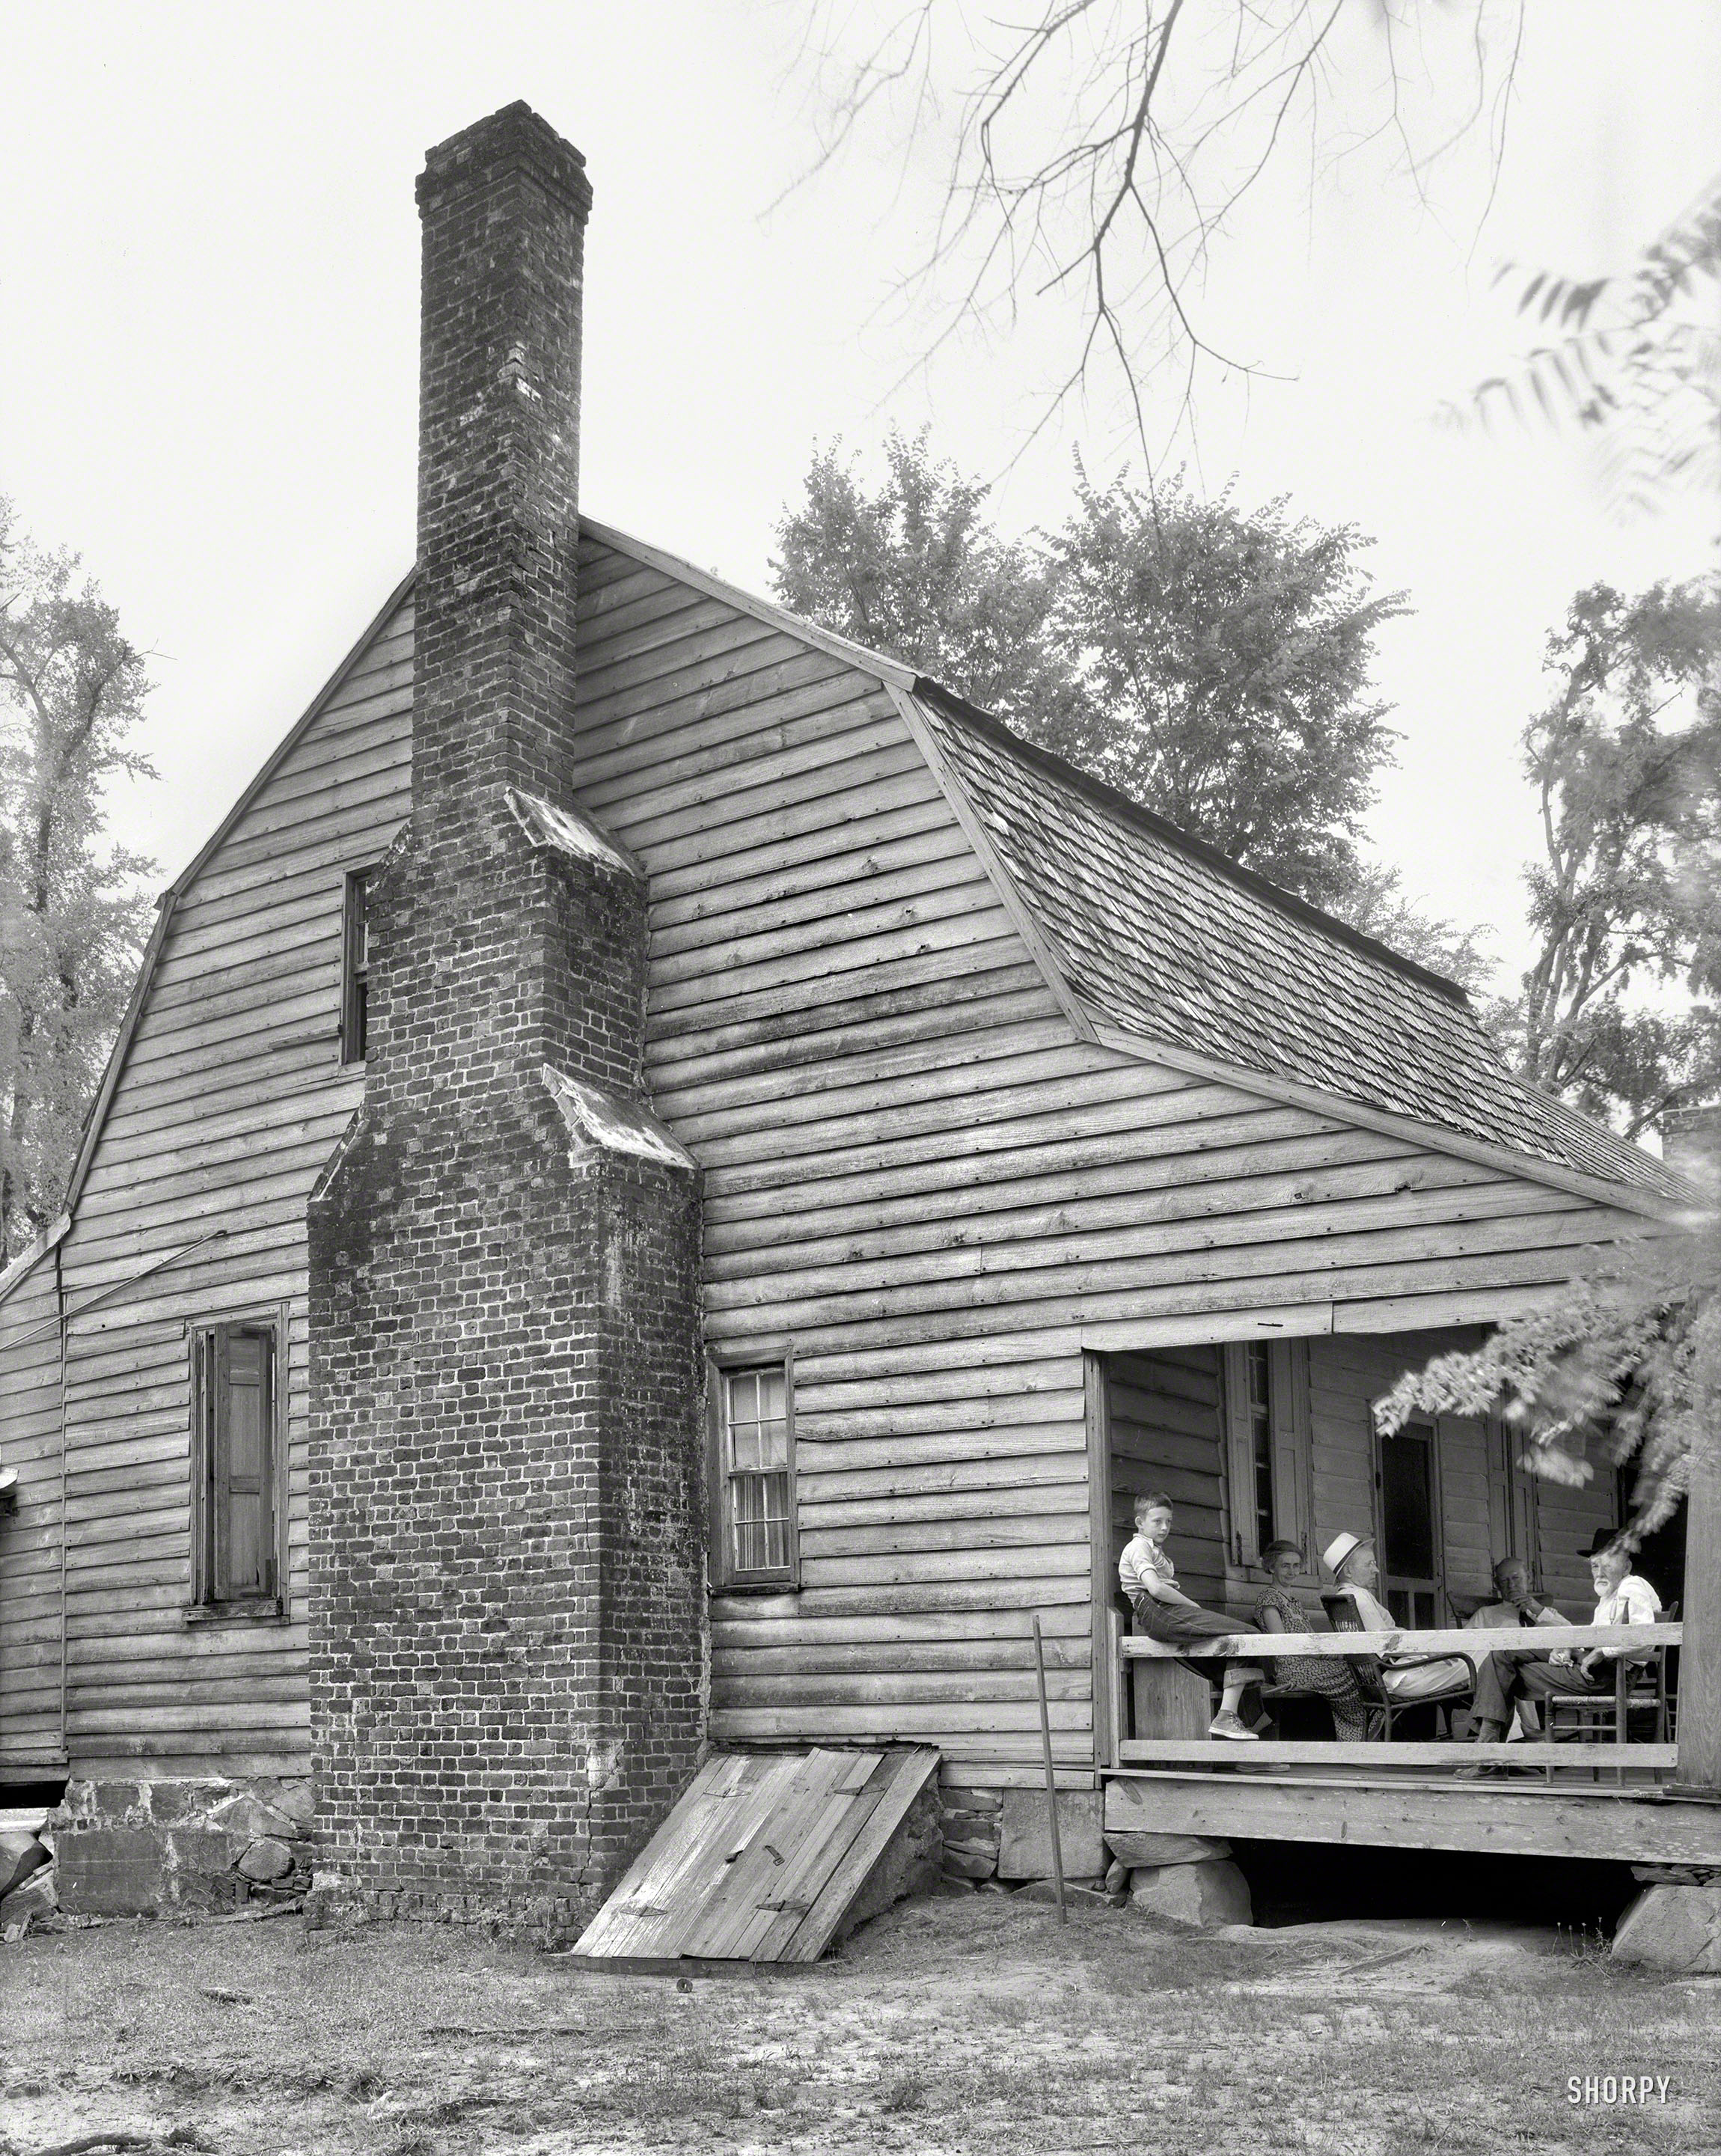 1936. "Col. Alfred Cooper homestead. Aventon vicinity, Nash County, North Carolina. Structure dates to 1760; reputed oldest house in county." 8x10 inch acetate negative by Frances Benjamin Johnston. View full size.